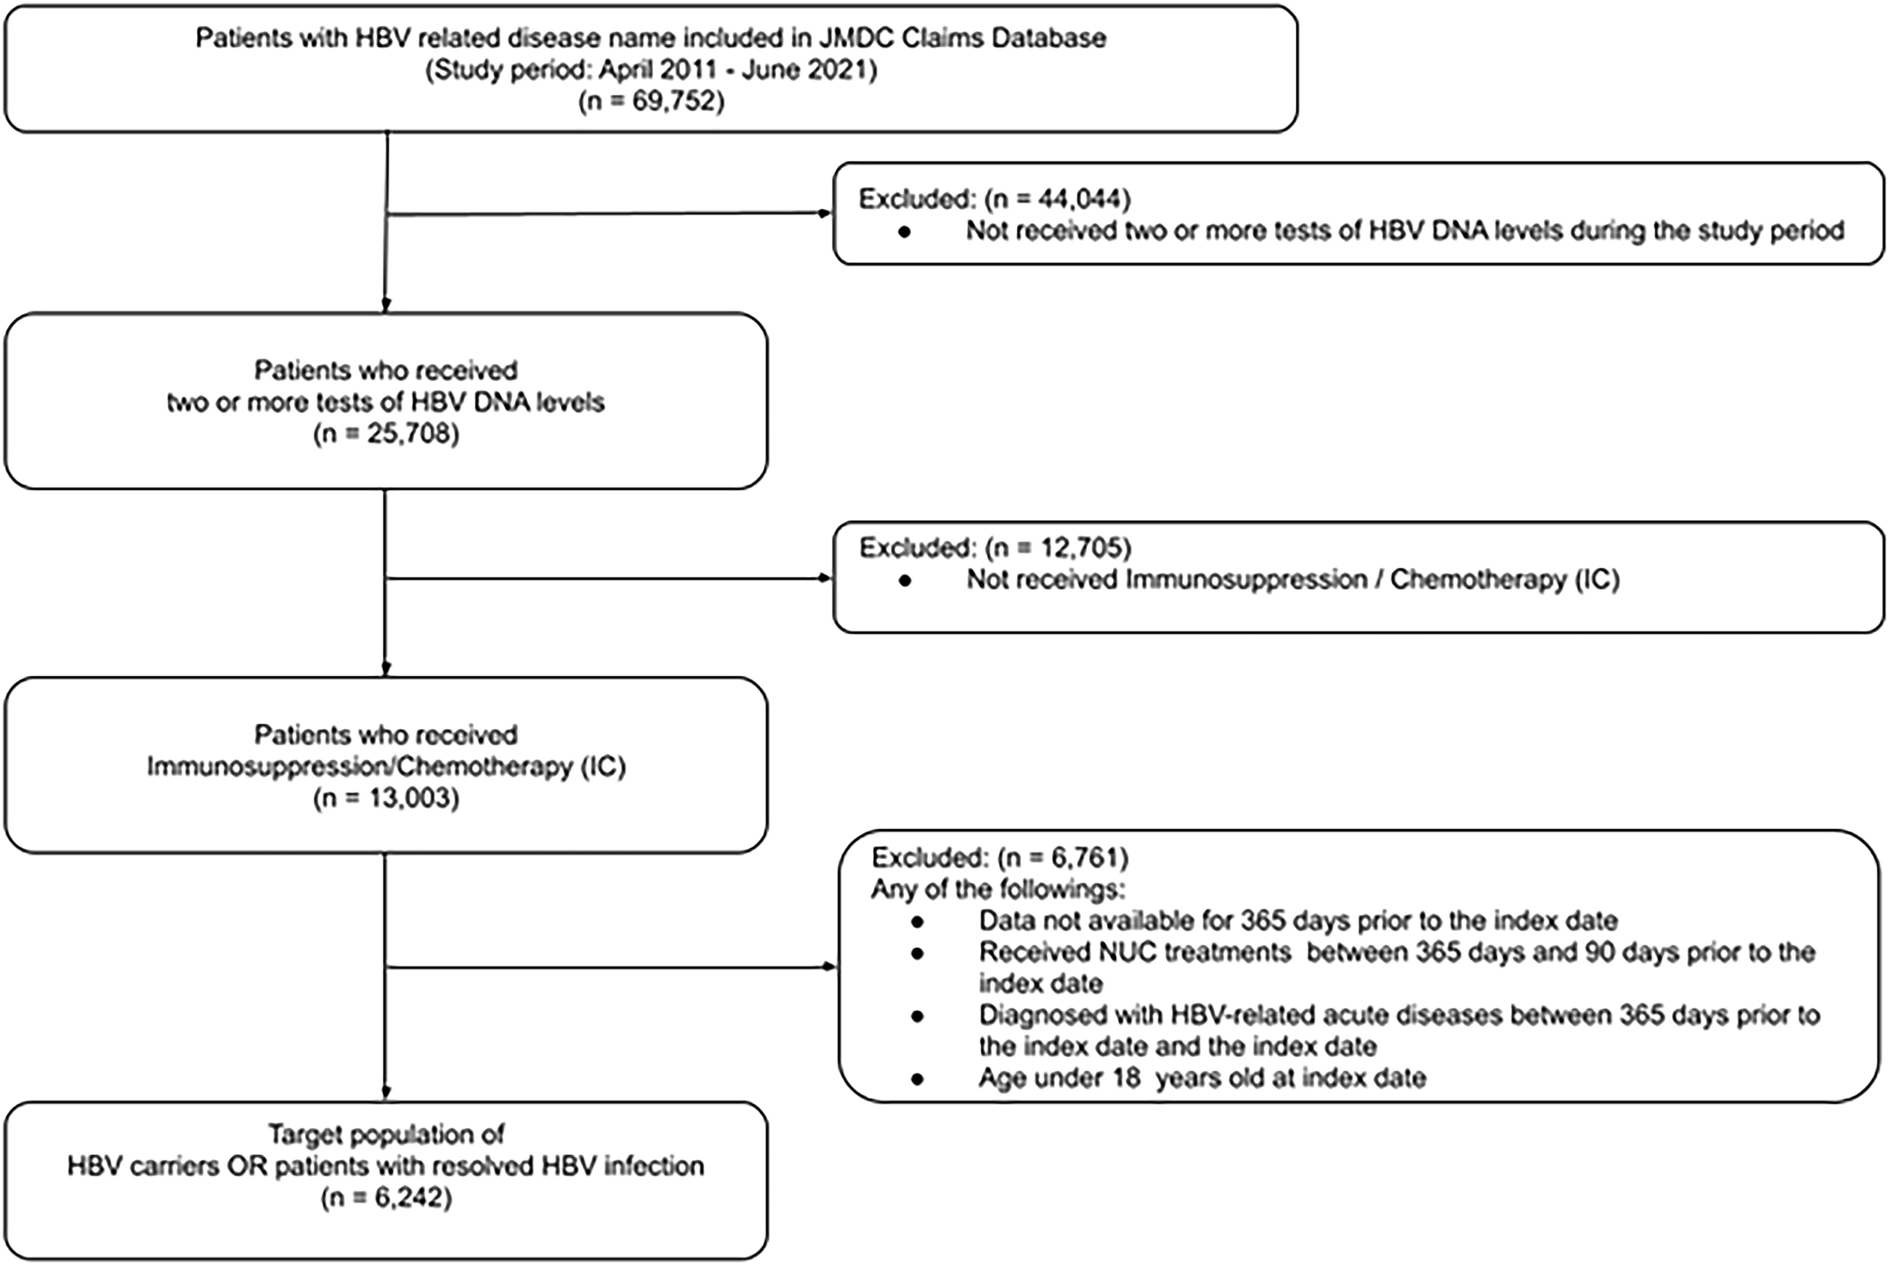 Implementation of Guideline-Based HBV Reactivation Management in Patients with Chronic HBV Infections of HBsAg or Resolved HBV Infection Undergoing Immunosuppressive Therapy